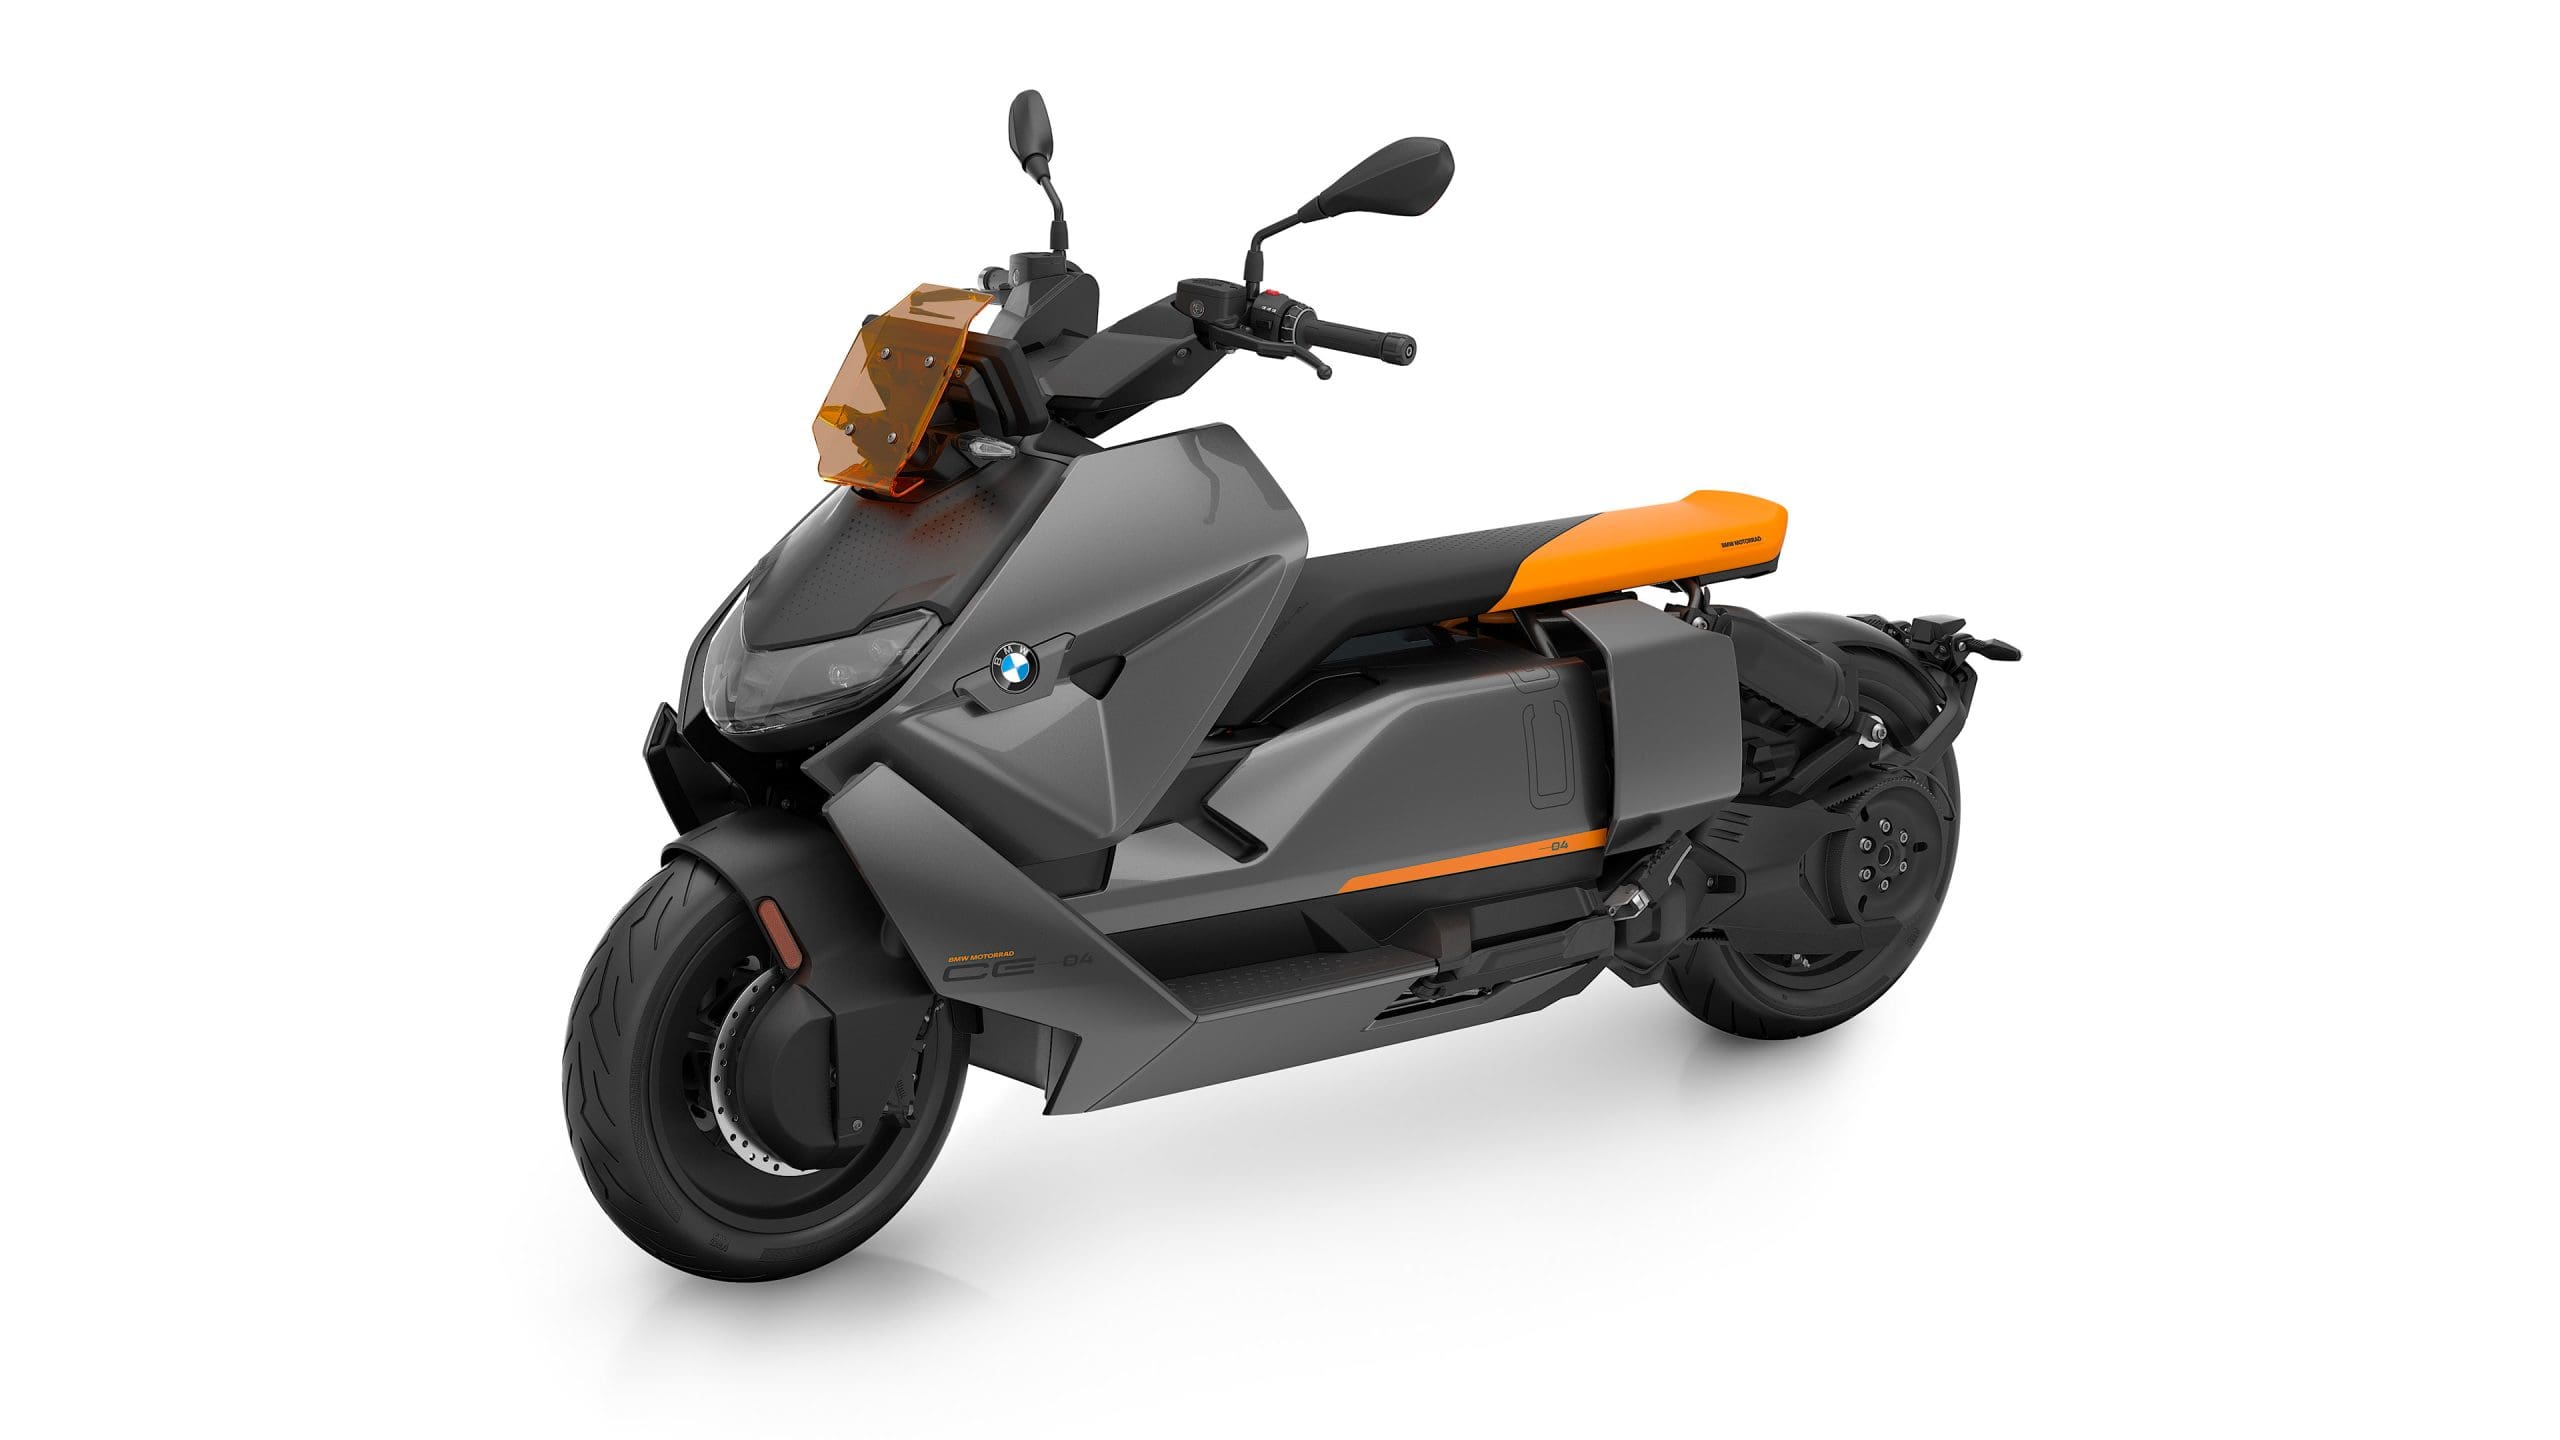 BMW's CE-04 electric scooter on a white background